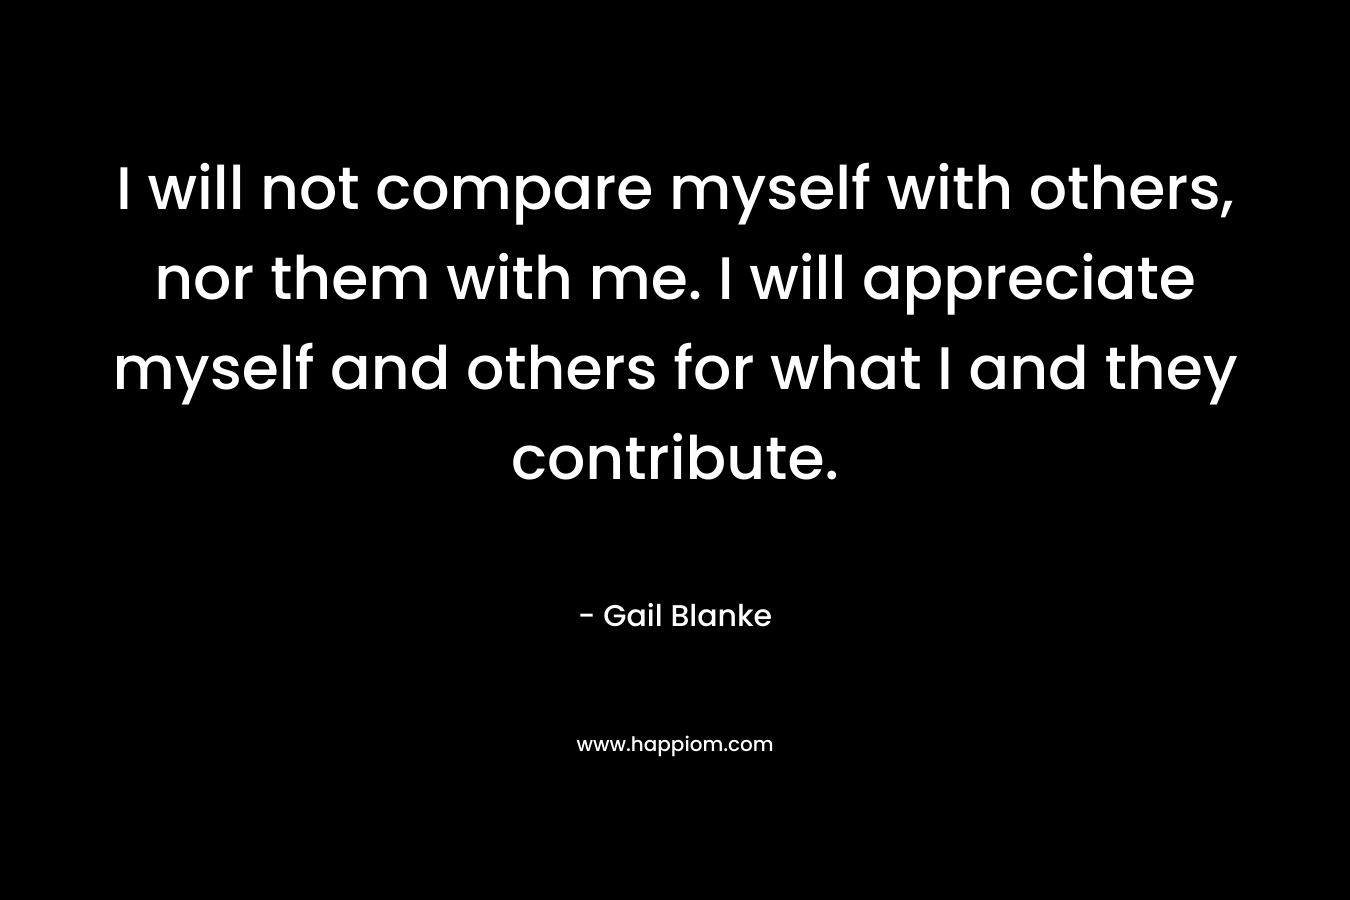 I will not compare myself with others, nor them with me. I will appreciate myself and others for what I and they contribute.